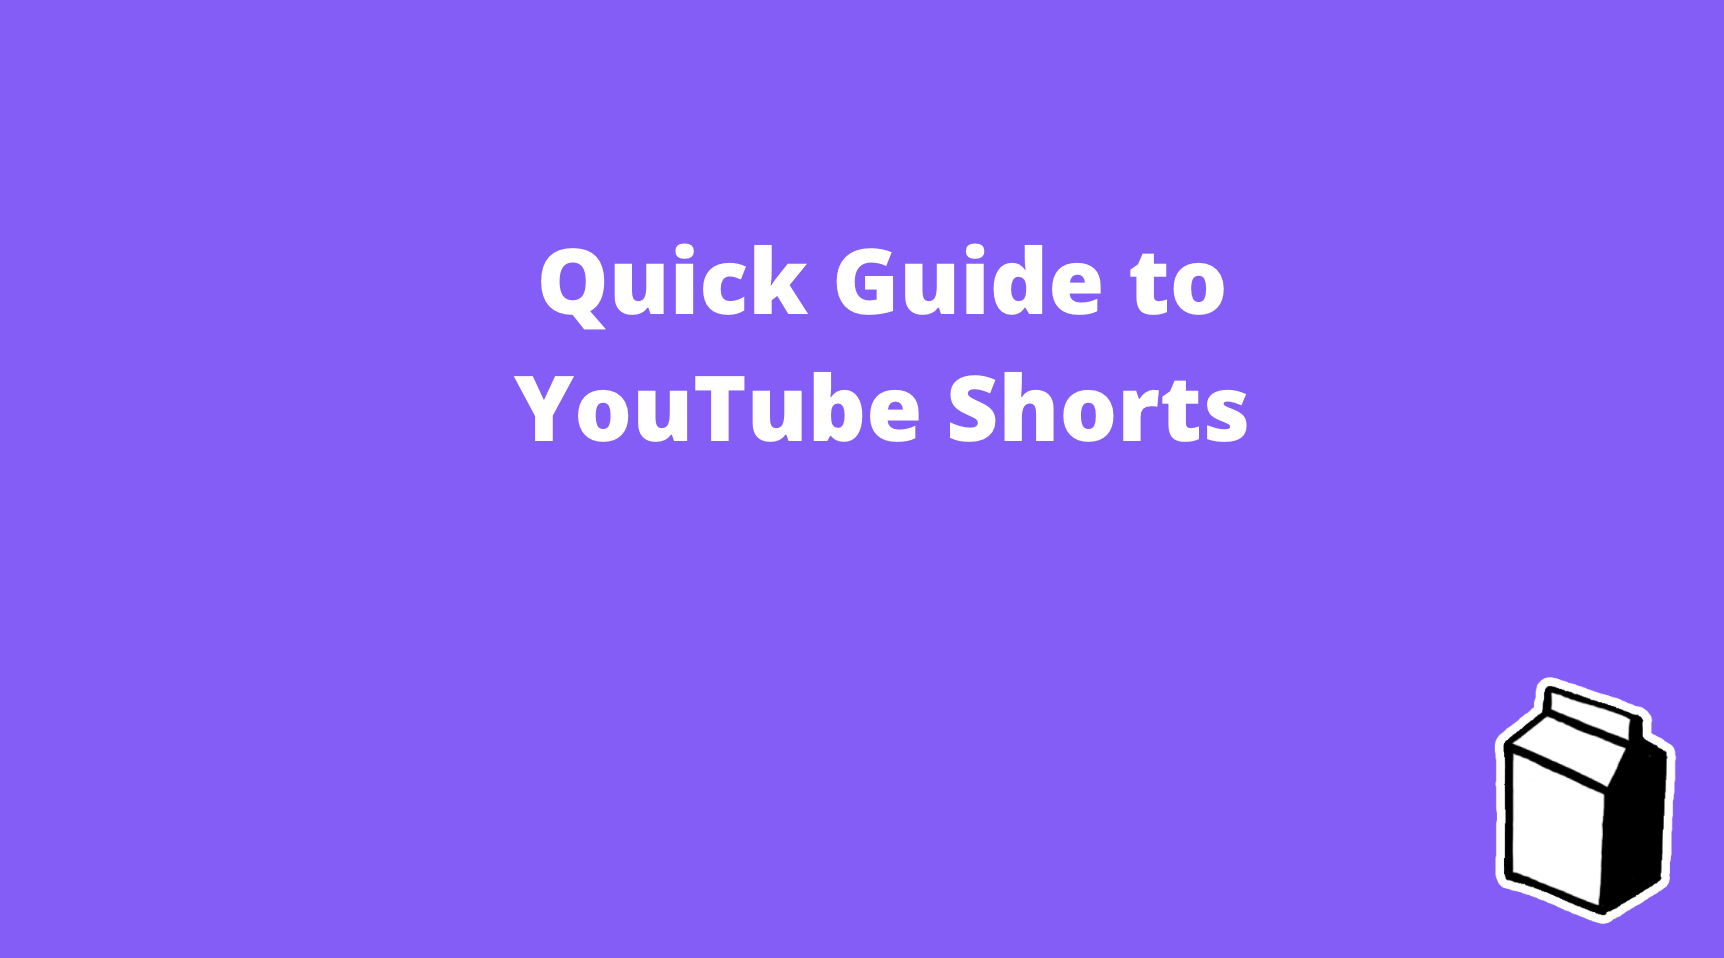 Quick Guide to YouTube Shorts